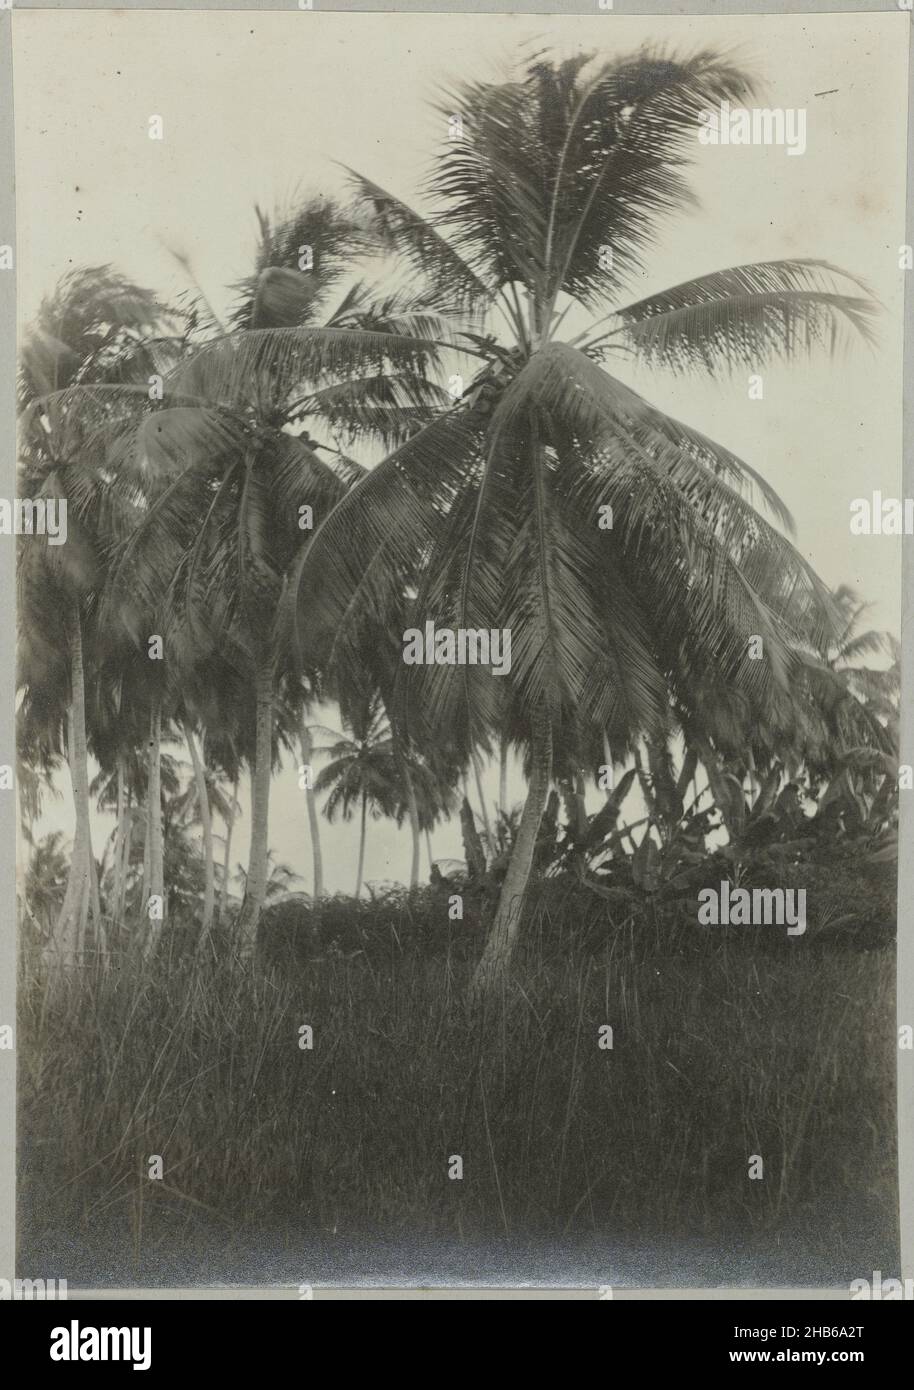 Coronie (title on object), Coconut trees in Coronie. Part of the photo album Souvenir de Voyage (part 2), about the life of the Doijer family in and around the plantation Ma Retraite in Suriname in the years 1906-1913., Hendrik Doijer (attributed to), Suriname, 1906 - 1913, photographic support, gelatin silver print, height 175 mm × width 122 mm Stock Photo